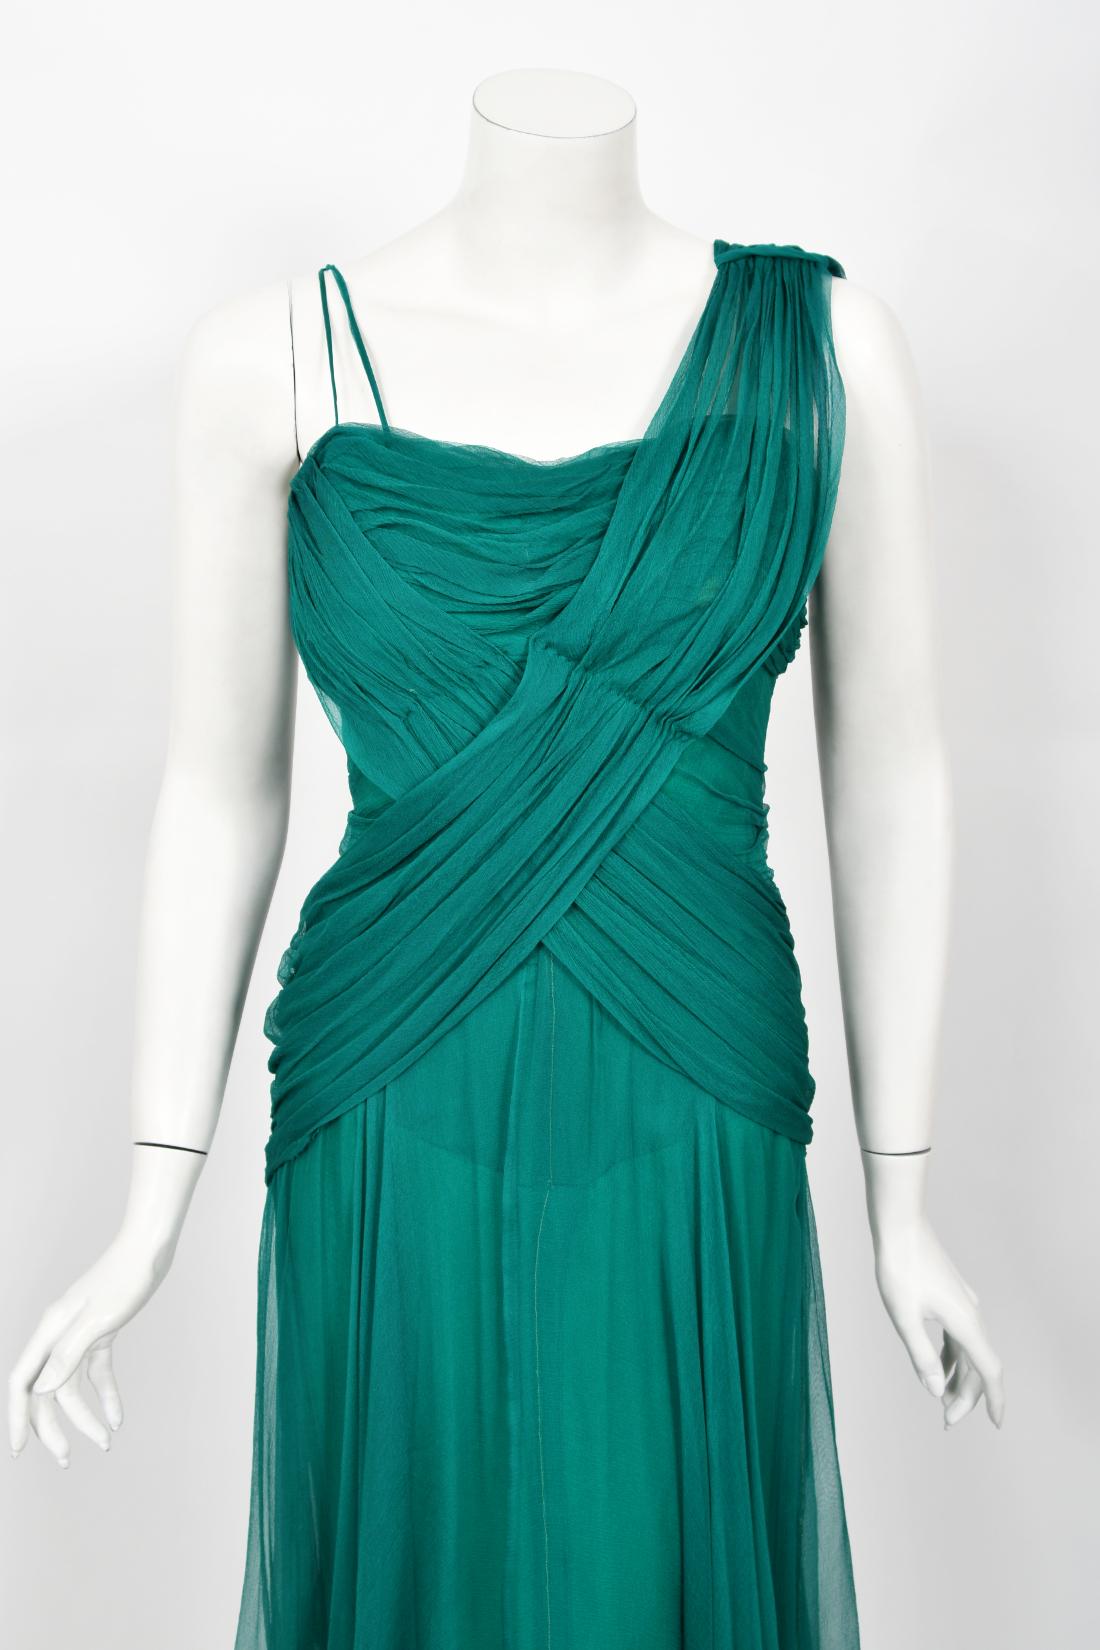 Women's Vintage 1950's Irene Lentz Couture Teal Green Draped Silk Grecian Goddess Gown For Sale